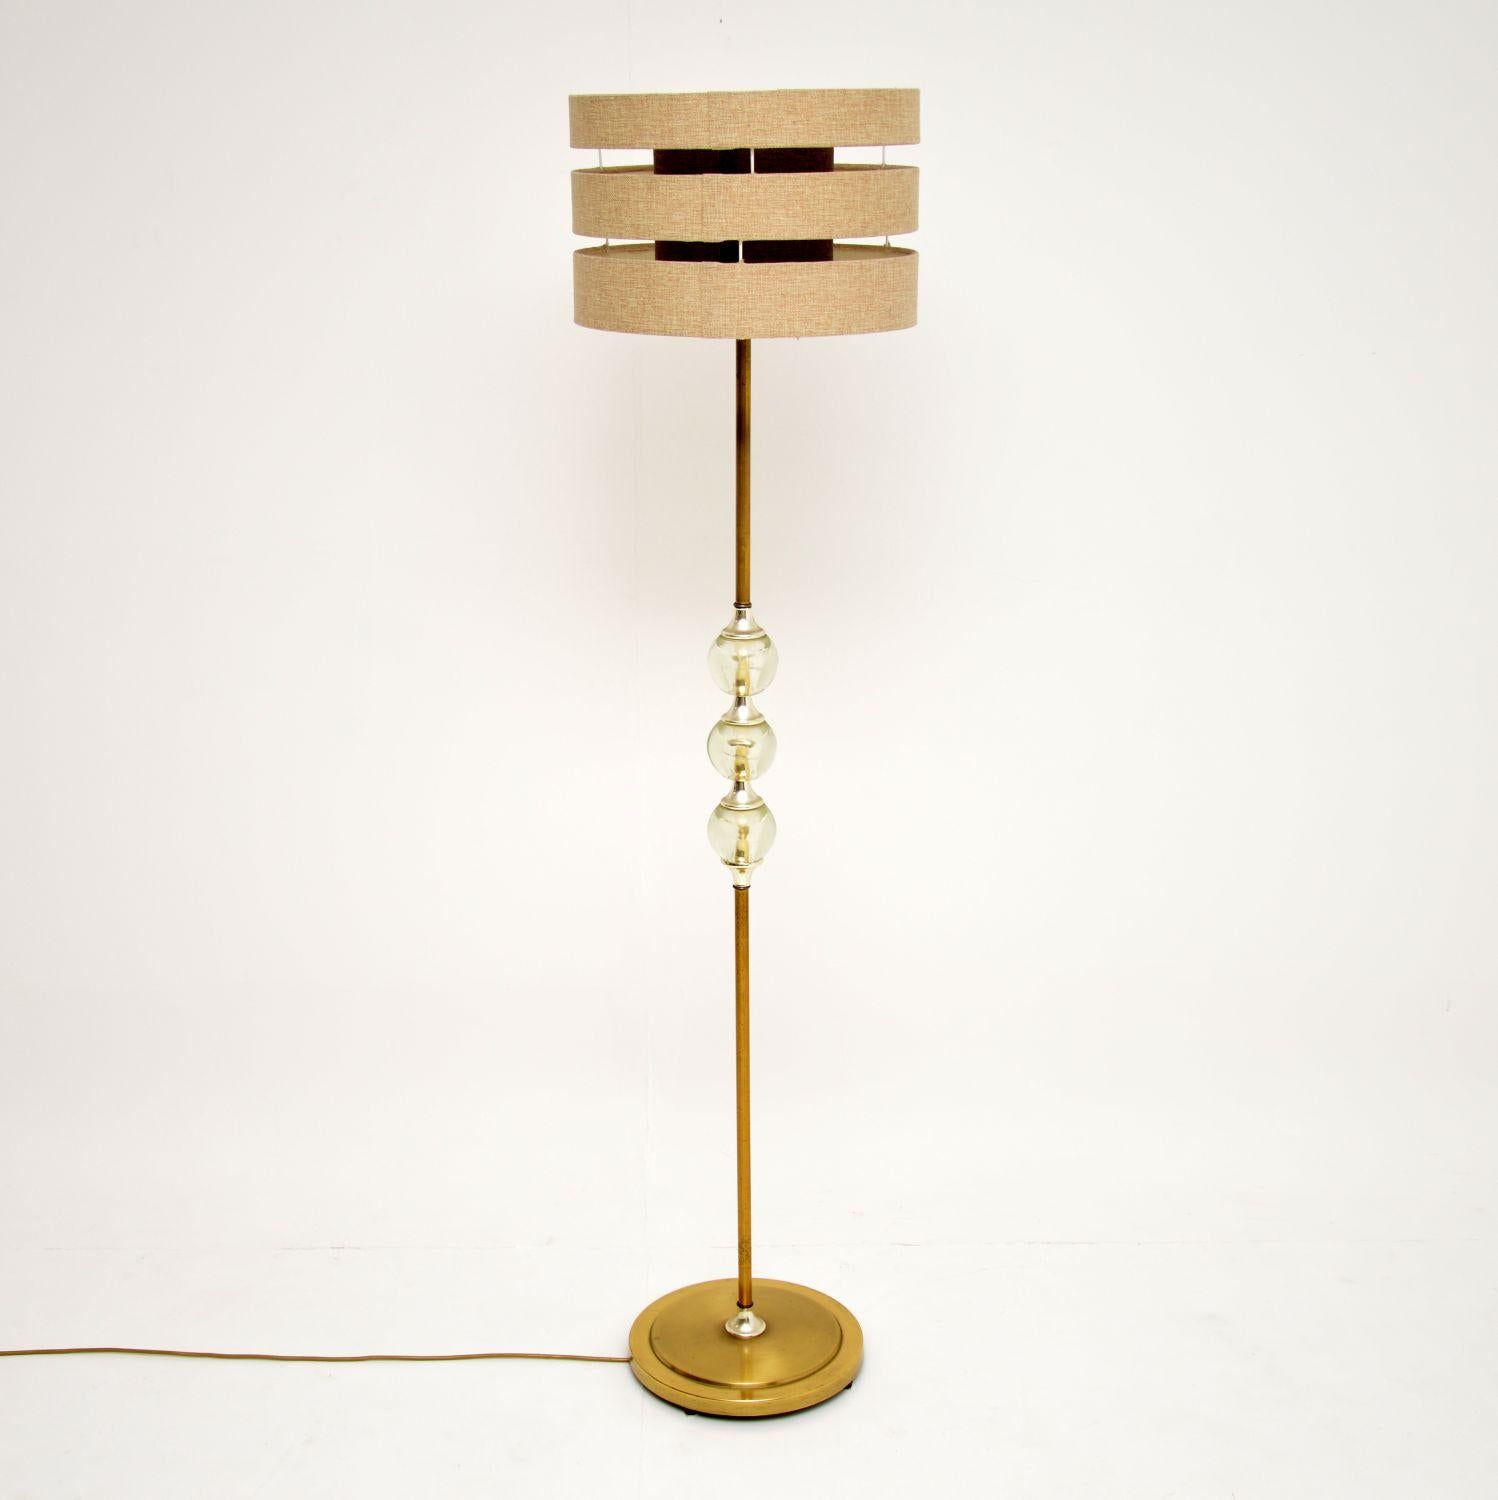 A stylish and very unusual vintage floor lamp, dating from the 1960s. This has a brass stand with three interesting balls in the middle made from acrylic. This is in good vintage condition and in good working order, there is just some minor wear